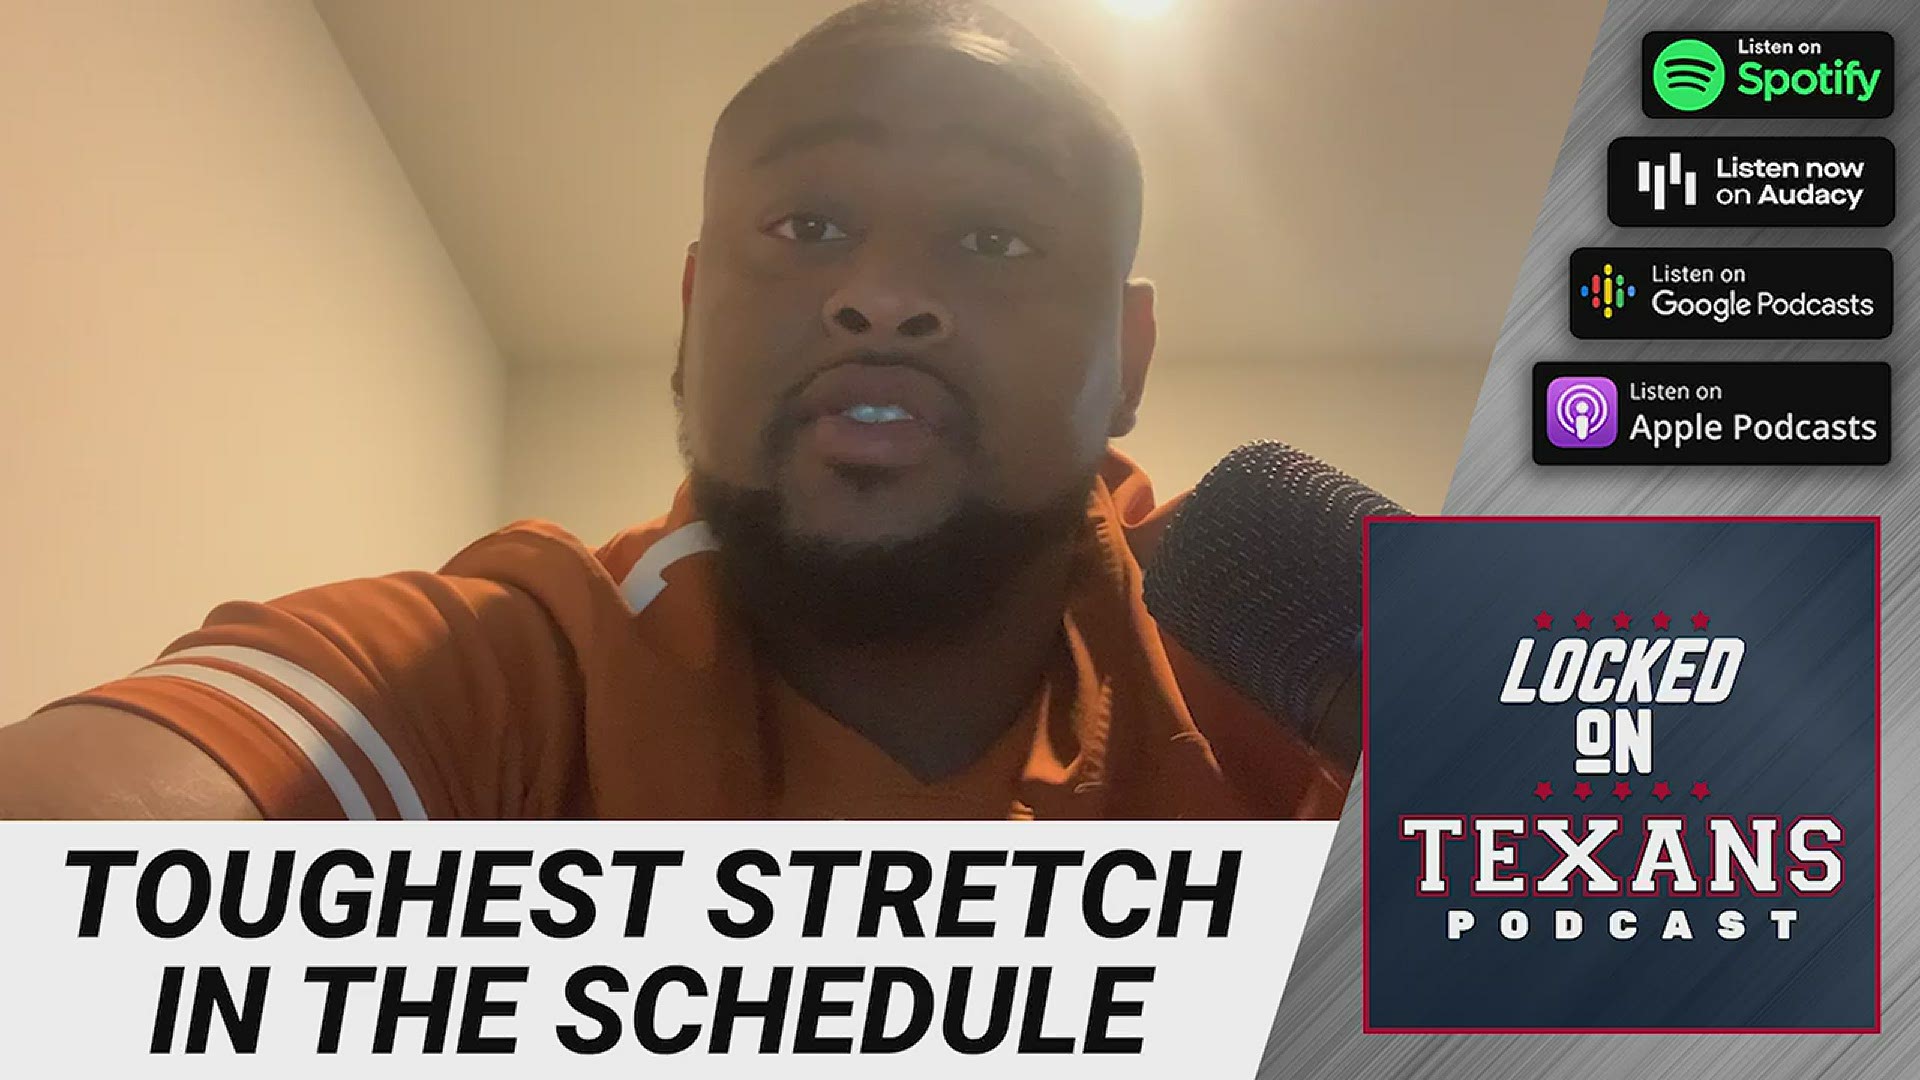 LockOn Texans is looking at Houston's schedule this season...and it's a tough one.